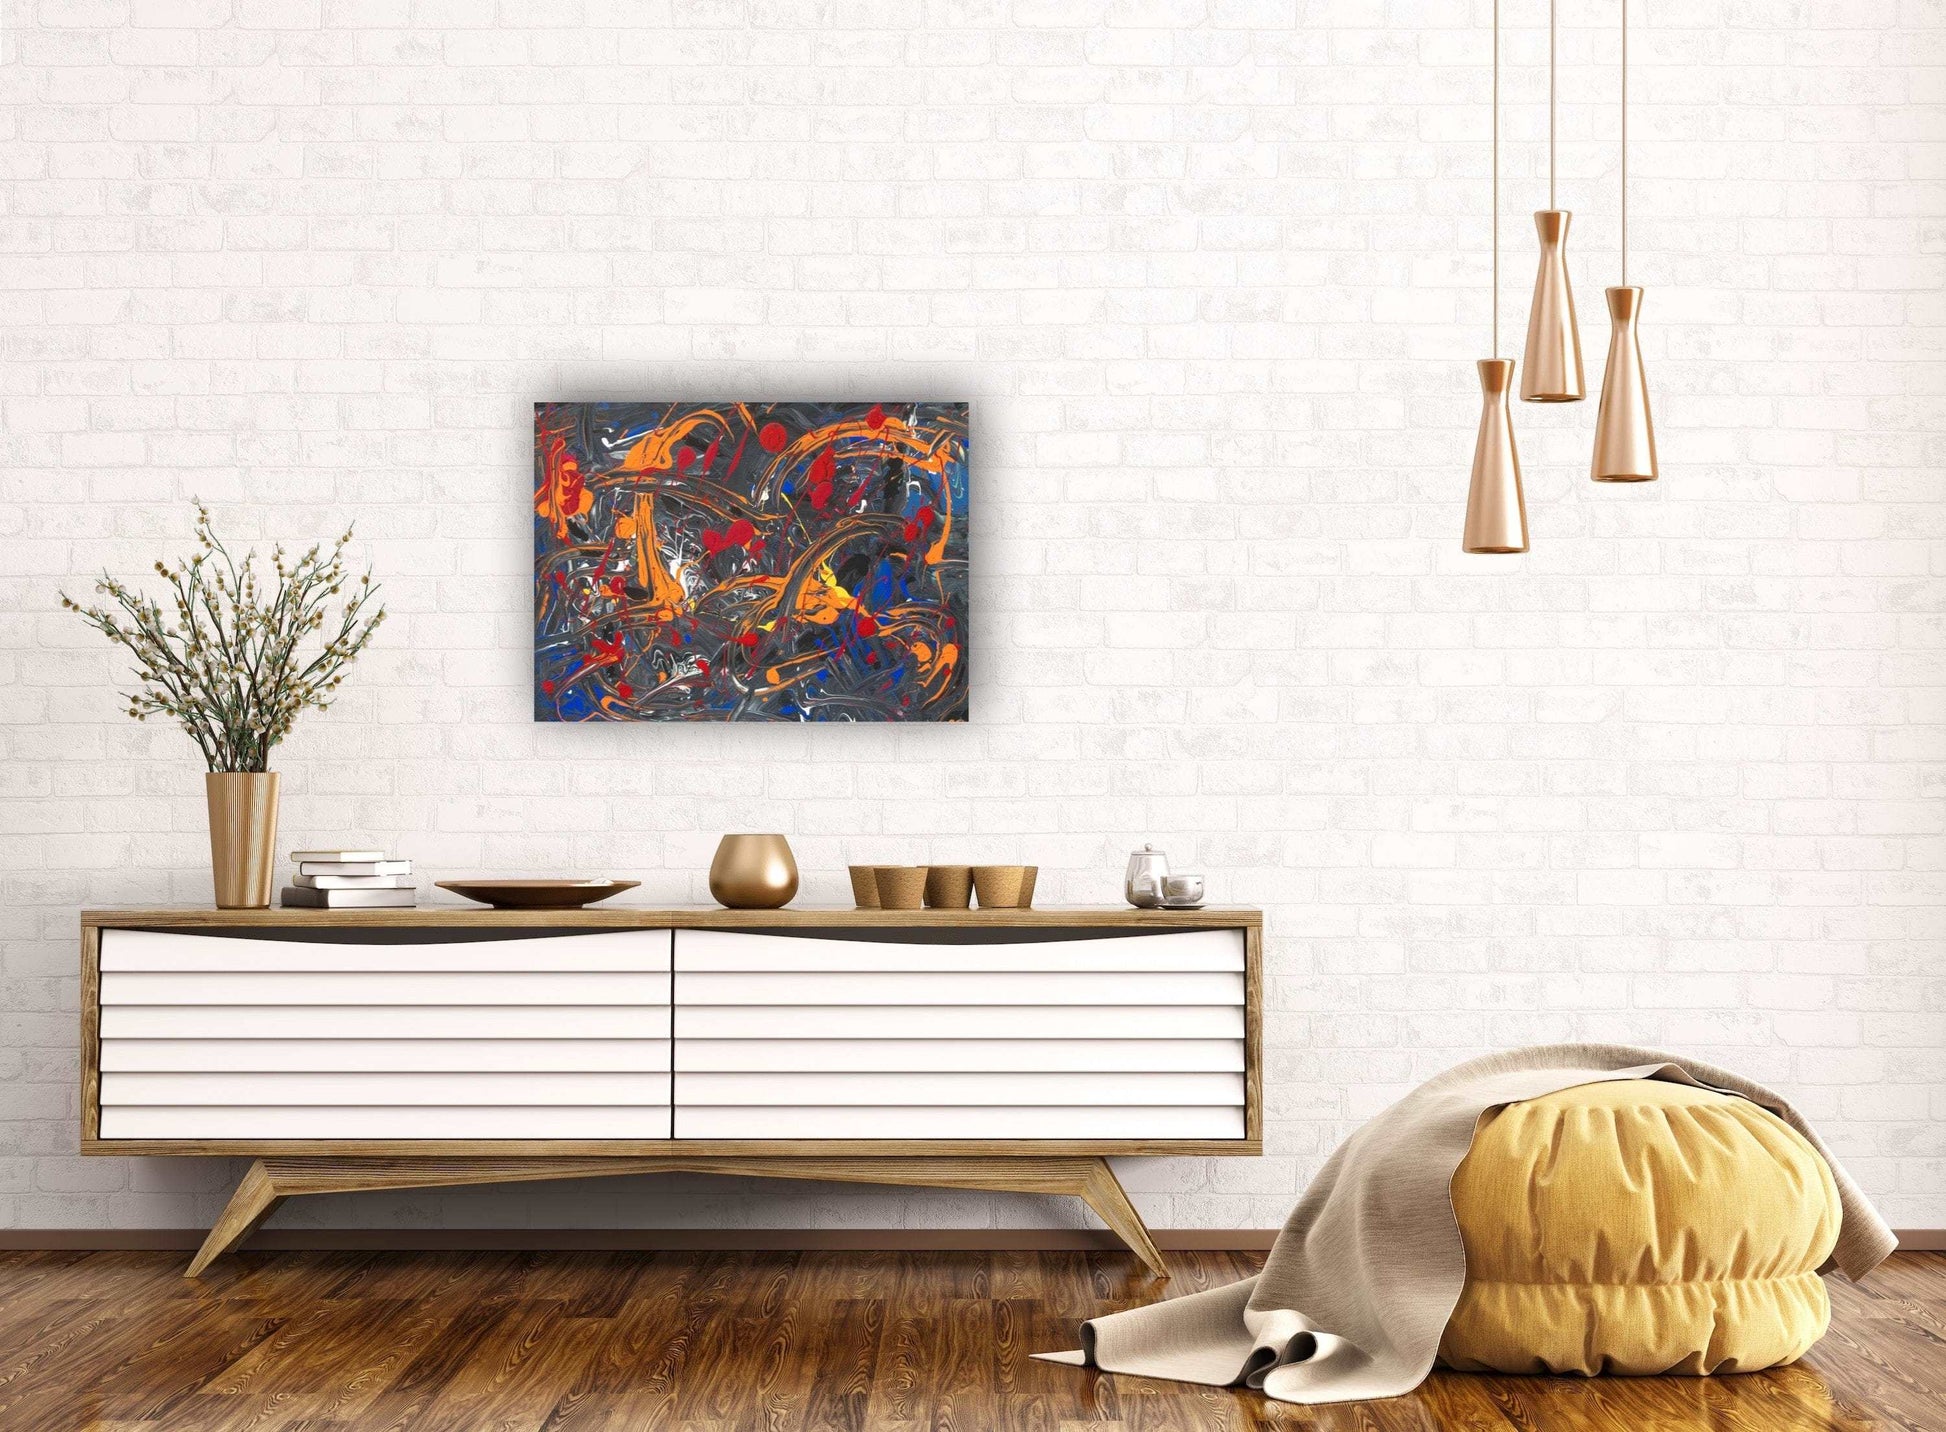 Fireworks - Abstract Acrylic Original Design Painting, by Art with Evie